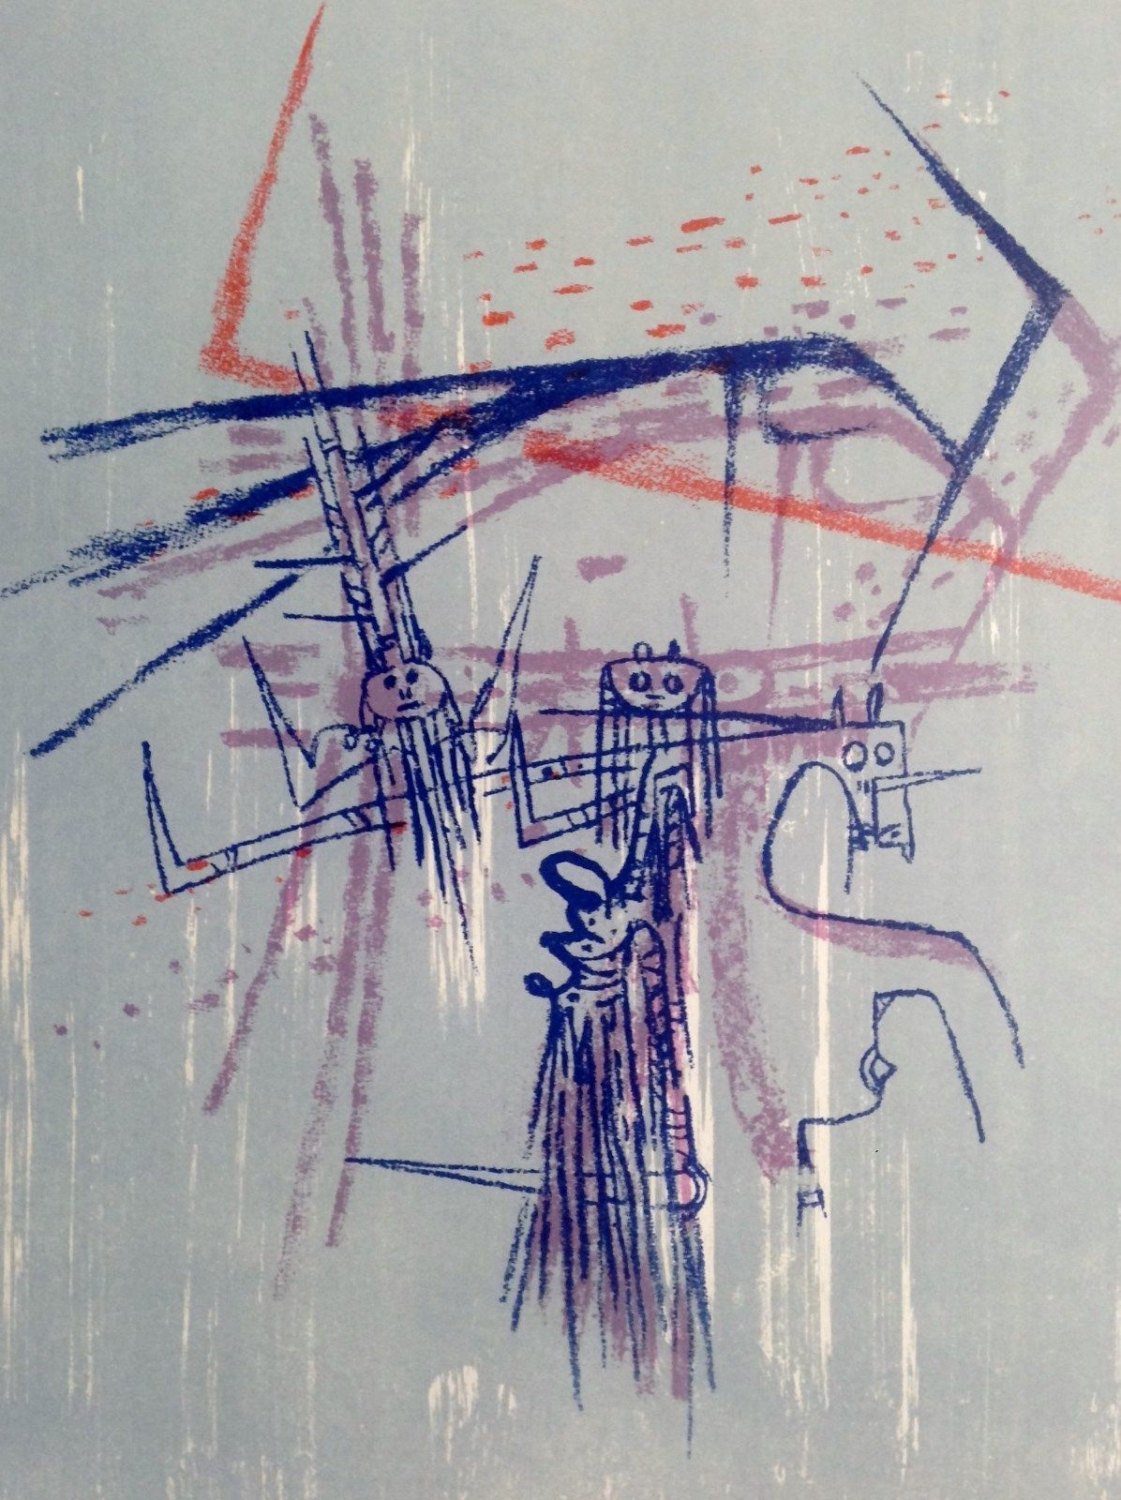 Wifredo Lam Lithograph, Les affinites ambigues, XX siecle 1963